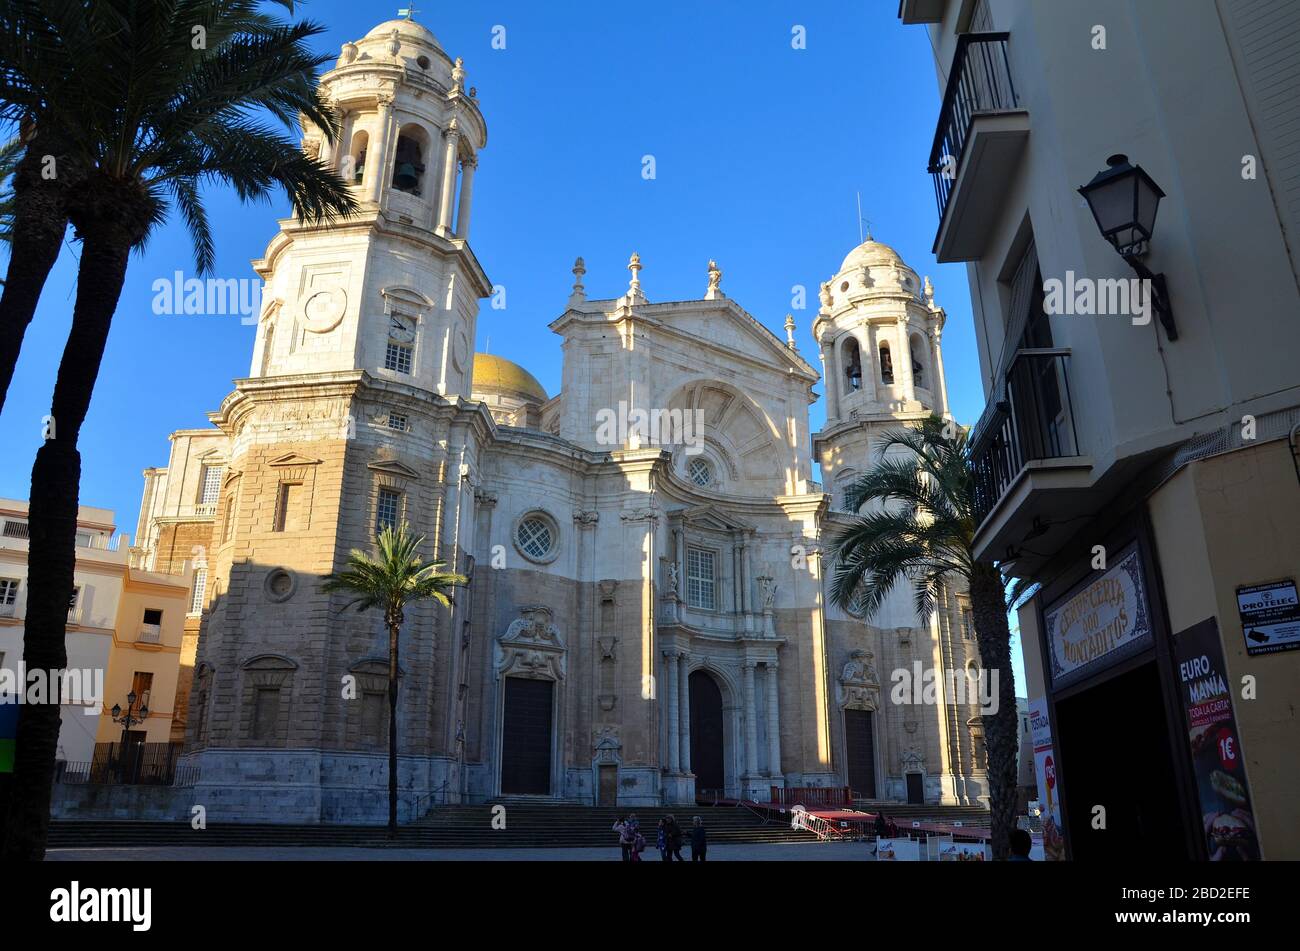 Cadice, Stadt am Atlantik, Andalusia, spagnolo: Die Kathedrale Foto Stock